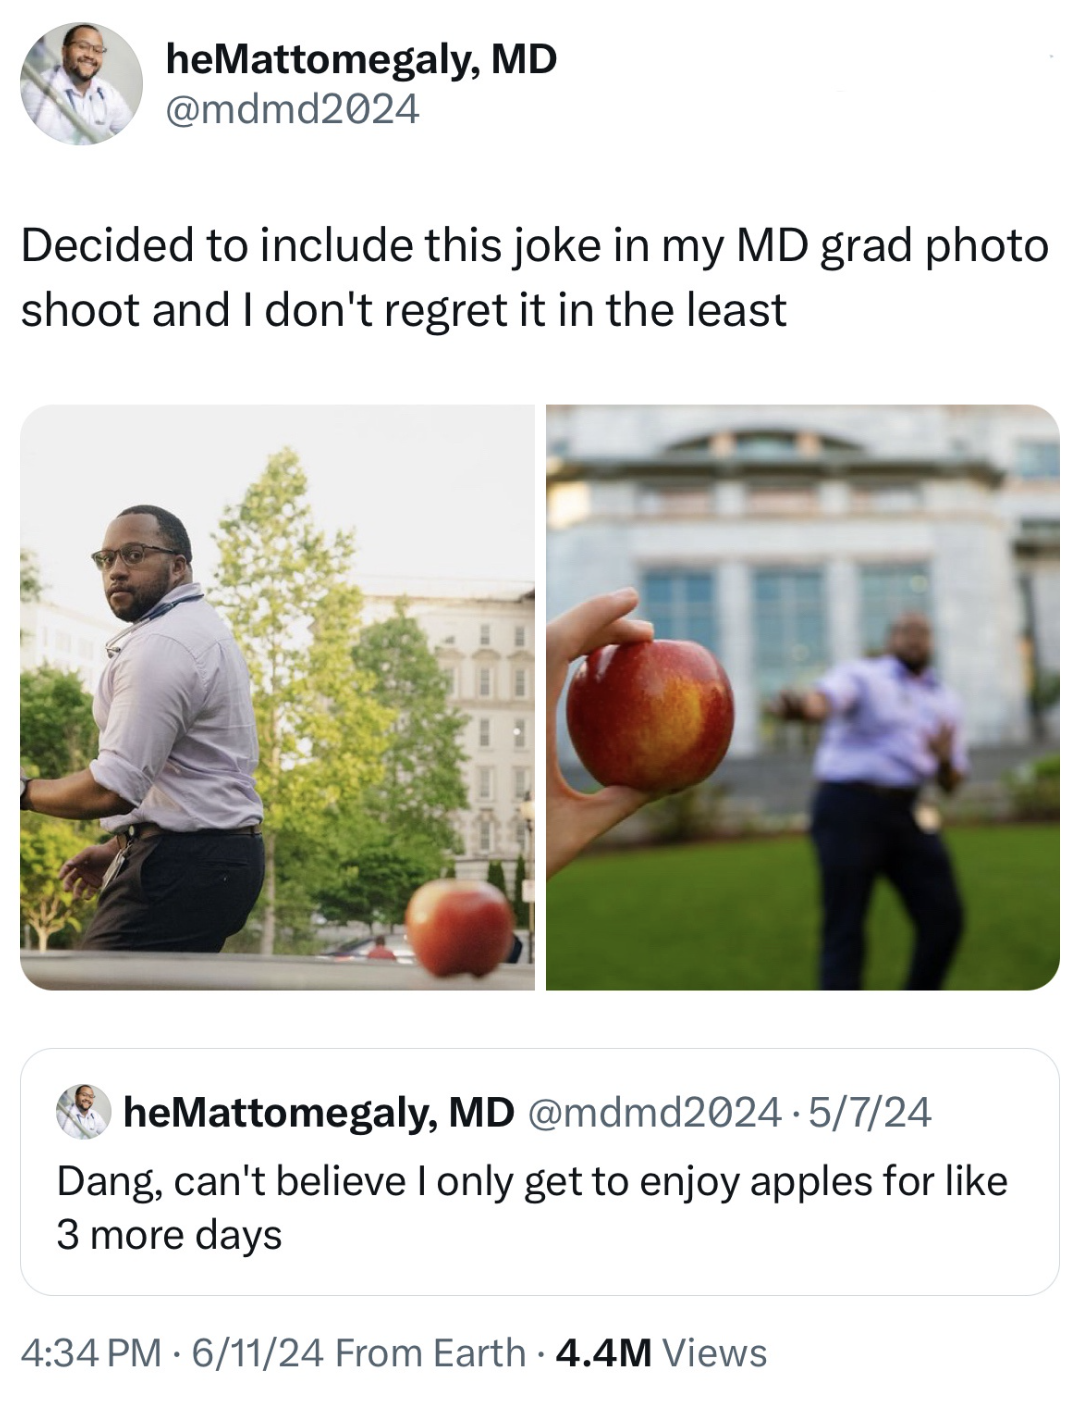 mcintosh - heMattomegaly, Md Decided to include this joke in my Md grad photo shoot and I don't regret it in the least heMattomegaly, Md 5724 Dang, can't believe I only get to enjoy apples for 3 more days 61124 From Earth 4.4M Views